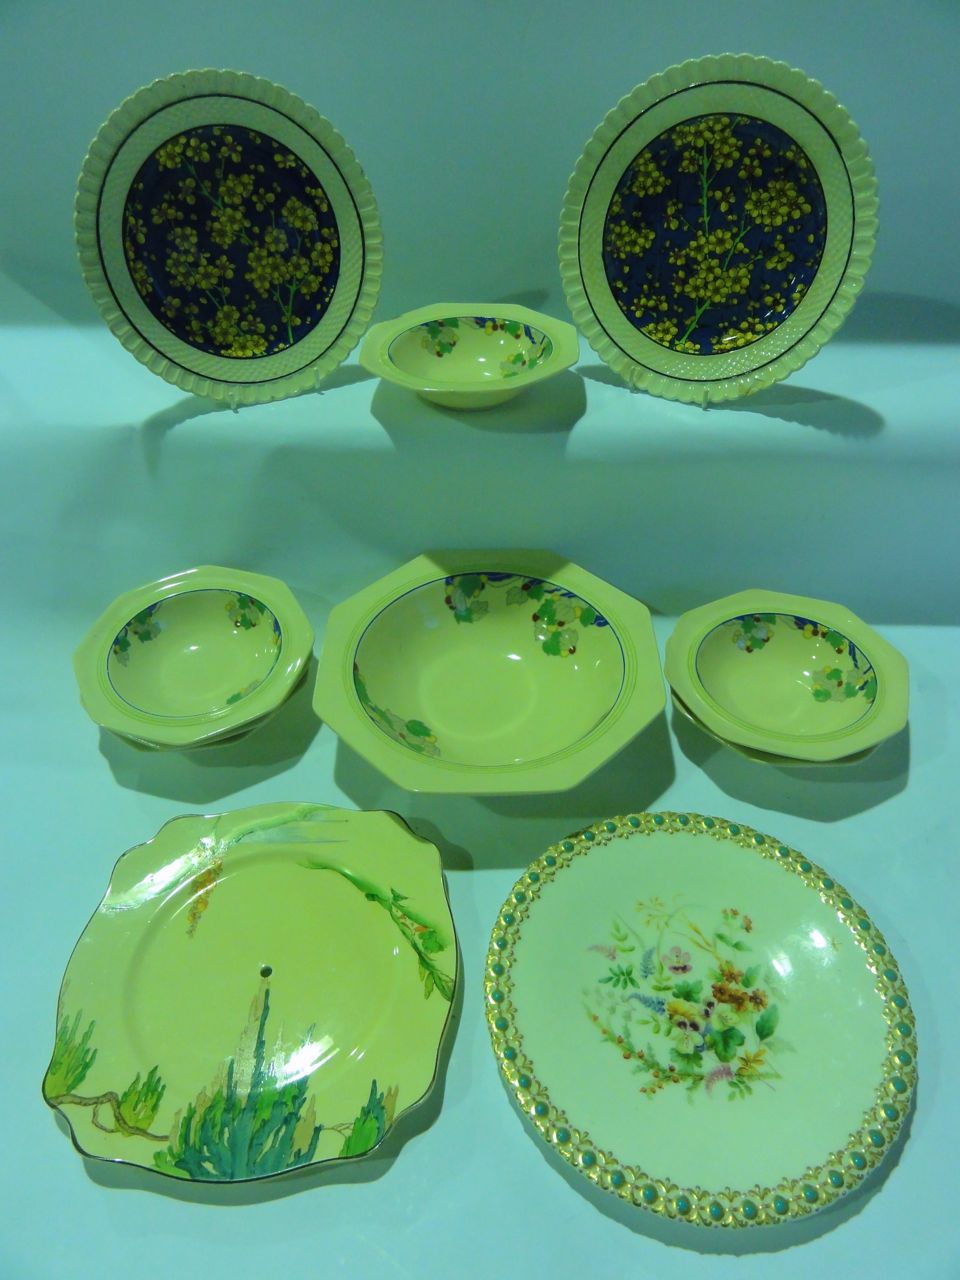 Six Royal Doulton "Wynn" pattern bowls (two sizes) and a serving bowl, a 19th century plate with